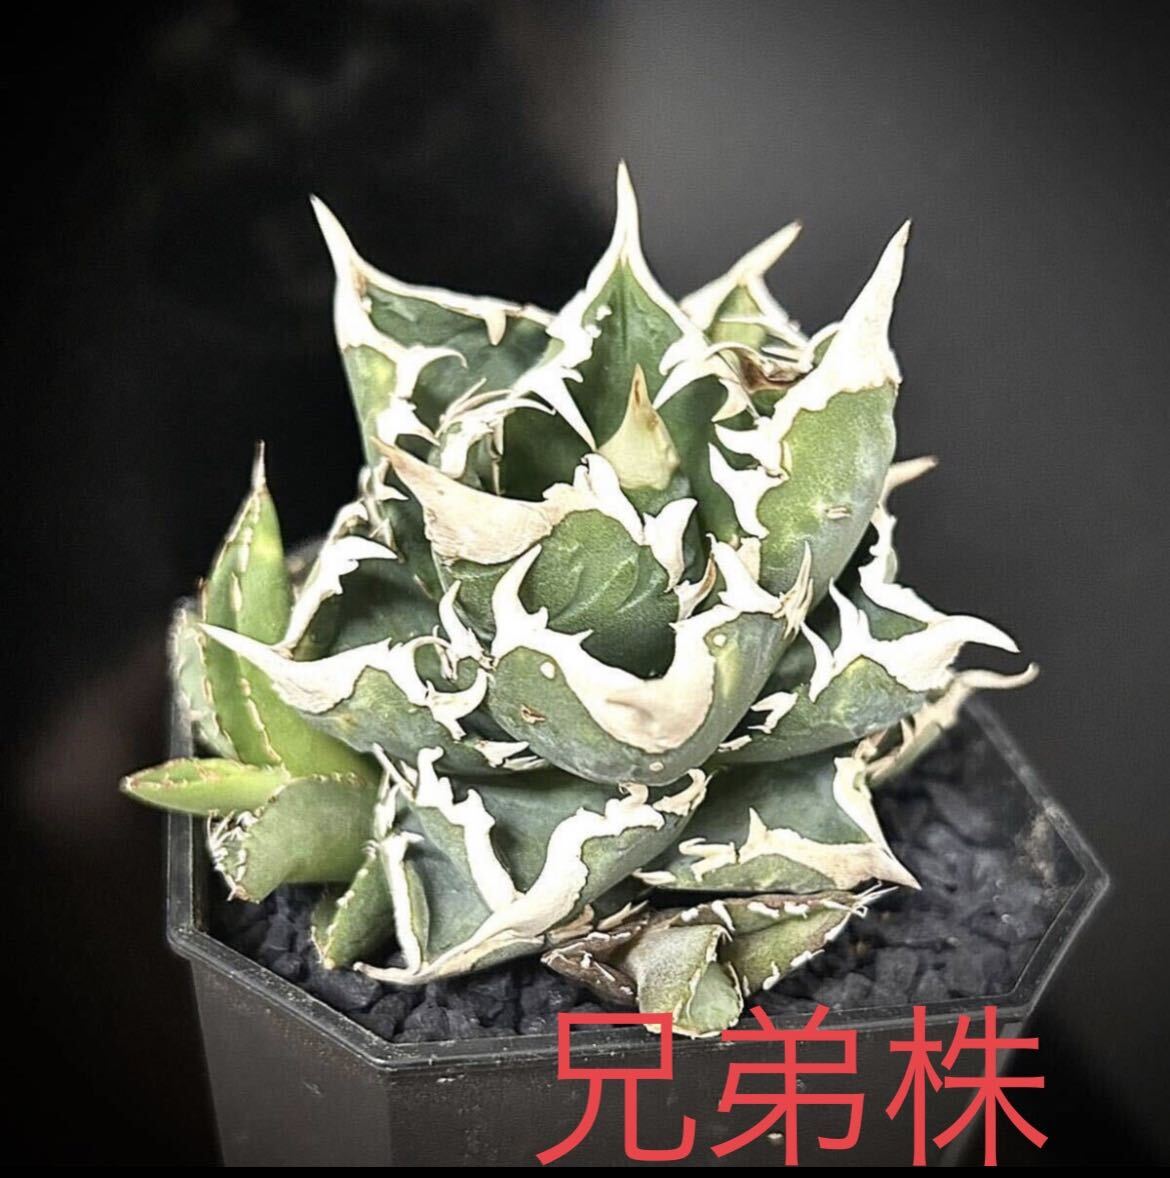 AGAVE TITANOTA 大白鯊 子株 ホホジロザメ②( cj special 皇冠 清櫻 アガベ チタノタ オテロイ_画像5